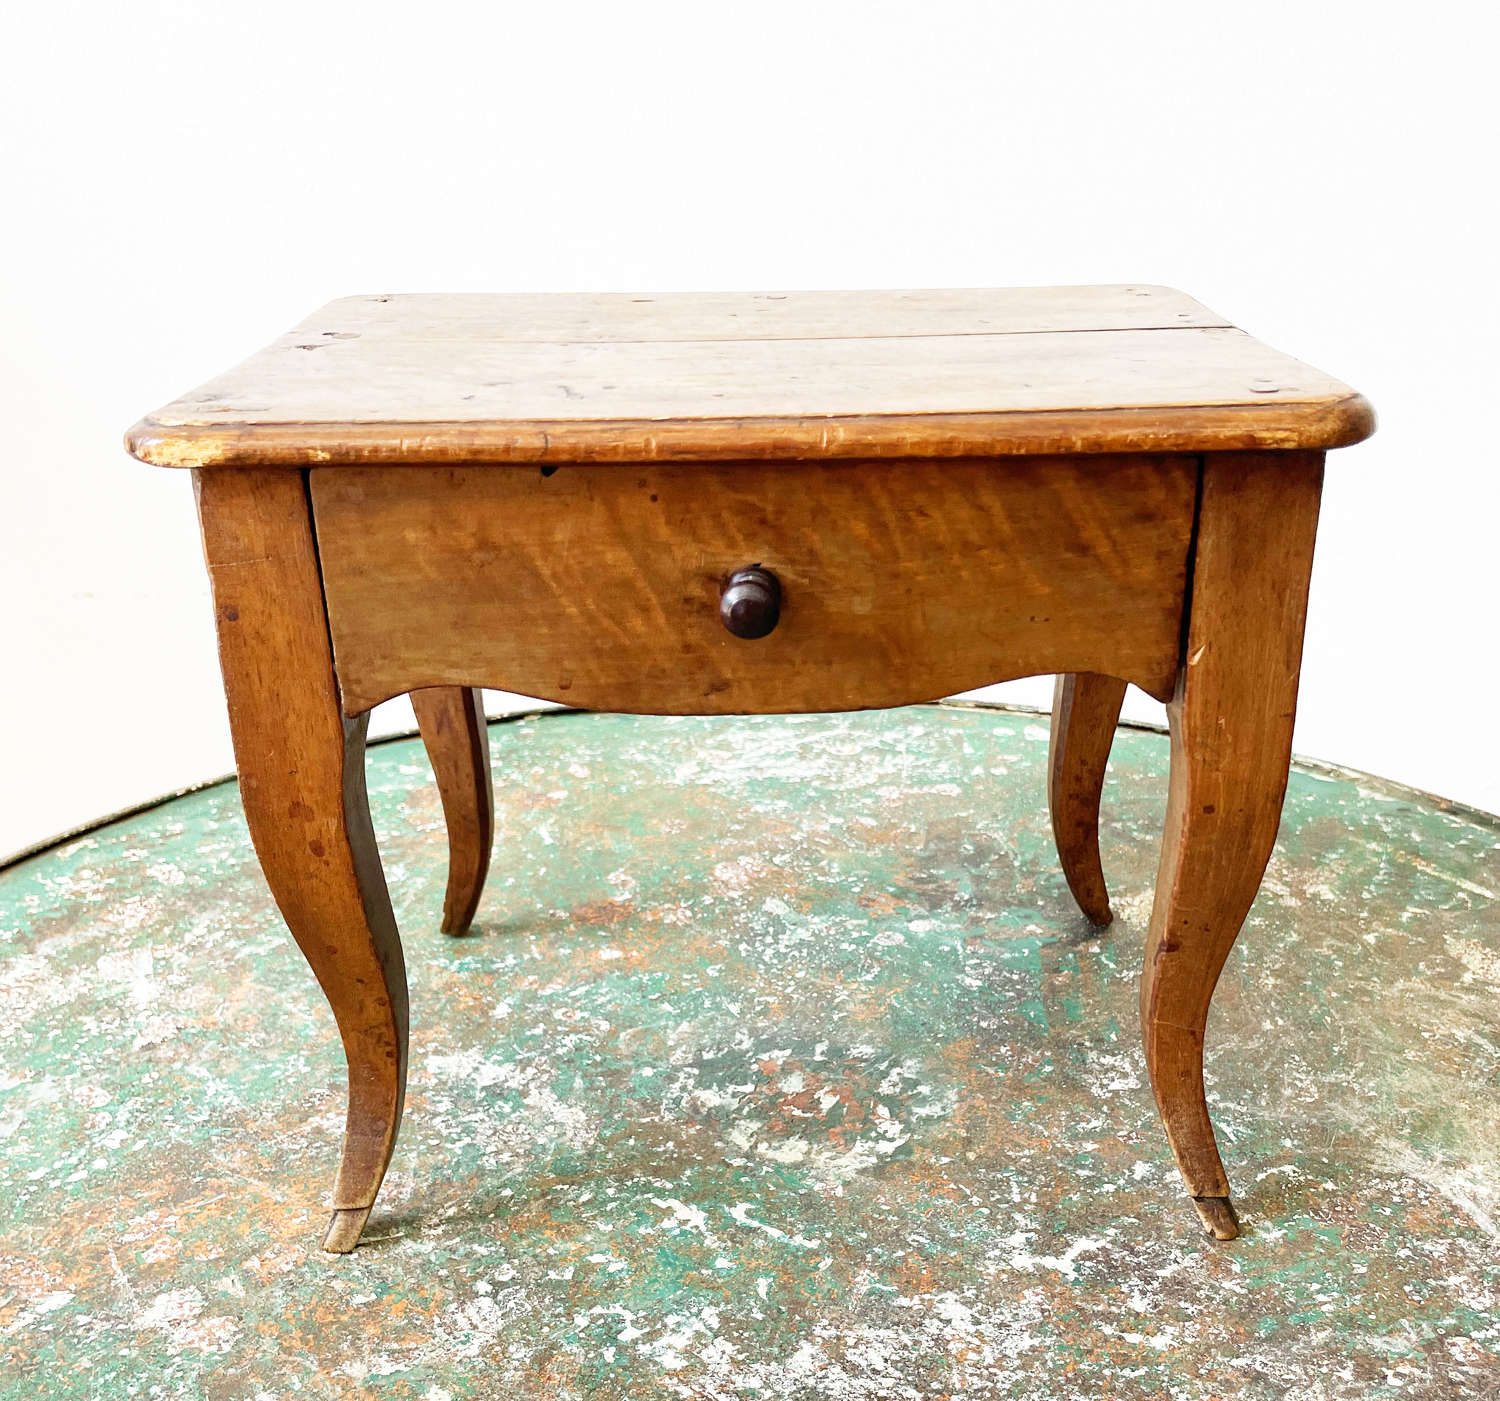 Miniature 19th century French Table - circa 1850